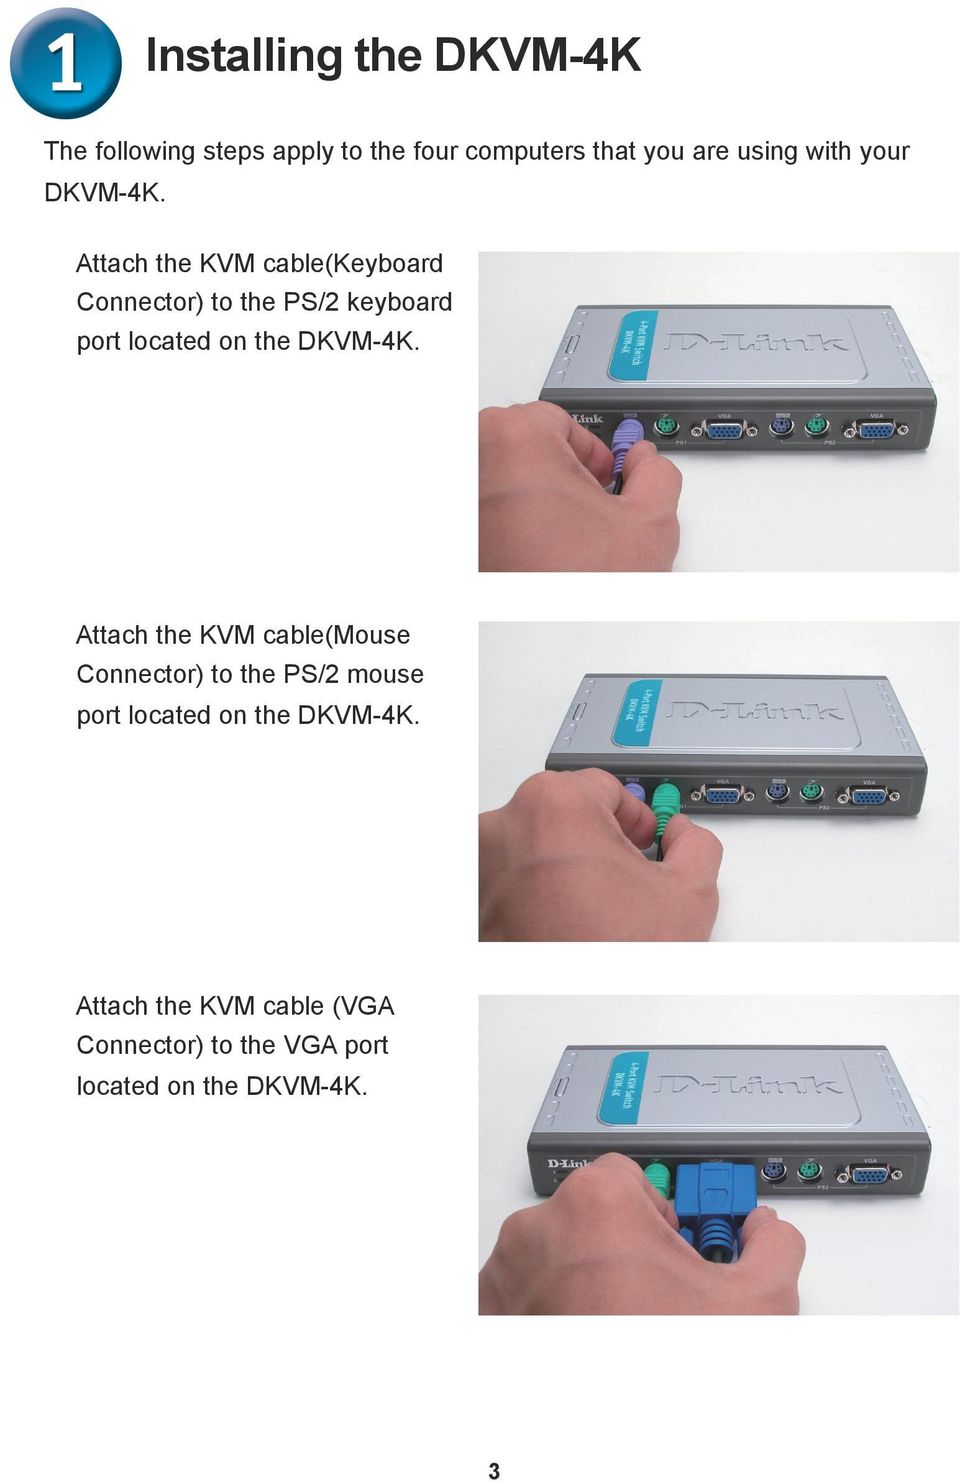 Attach the KVM cable(keyboard Connector) to the PS/2 keyboard port located on the DKVM-4K.